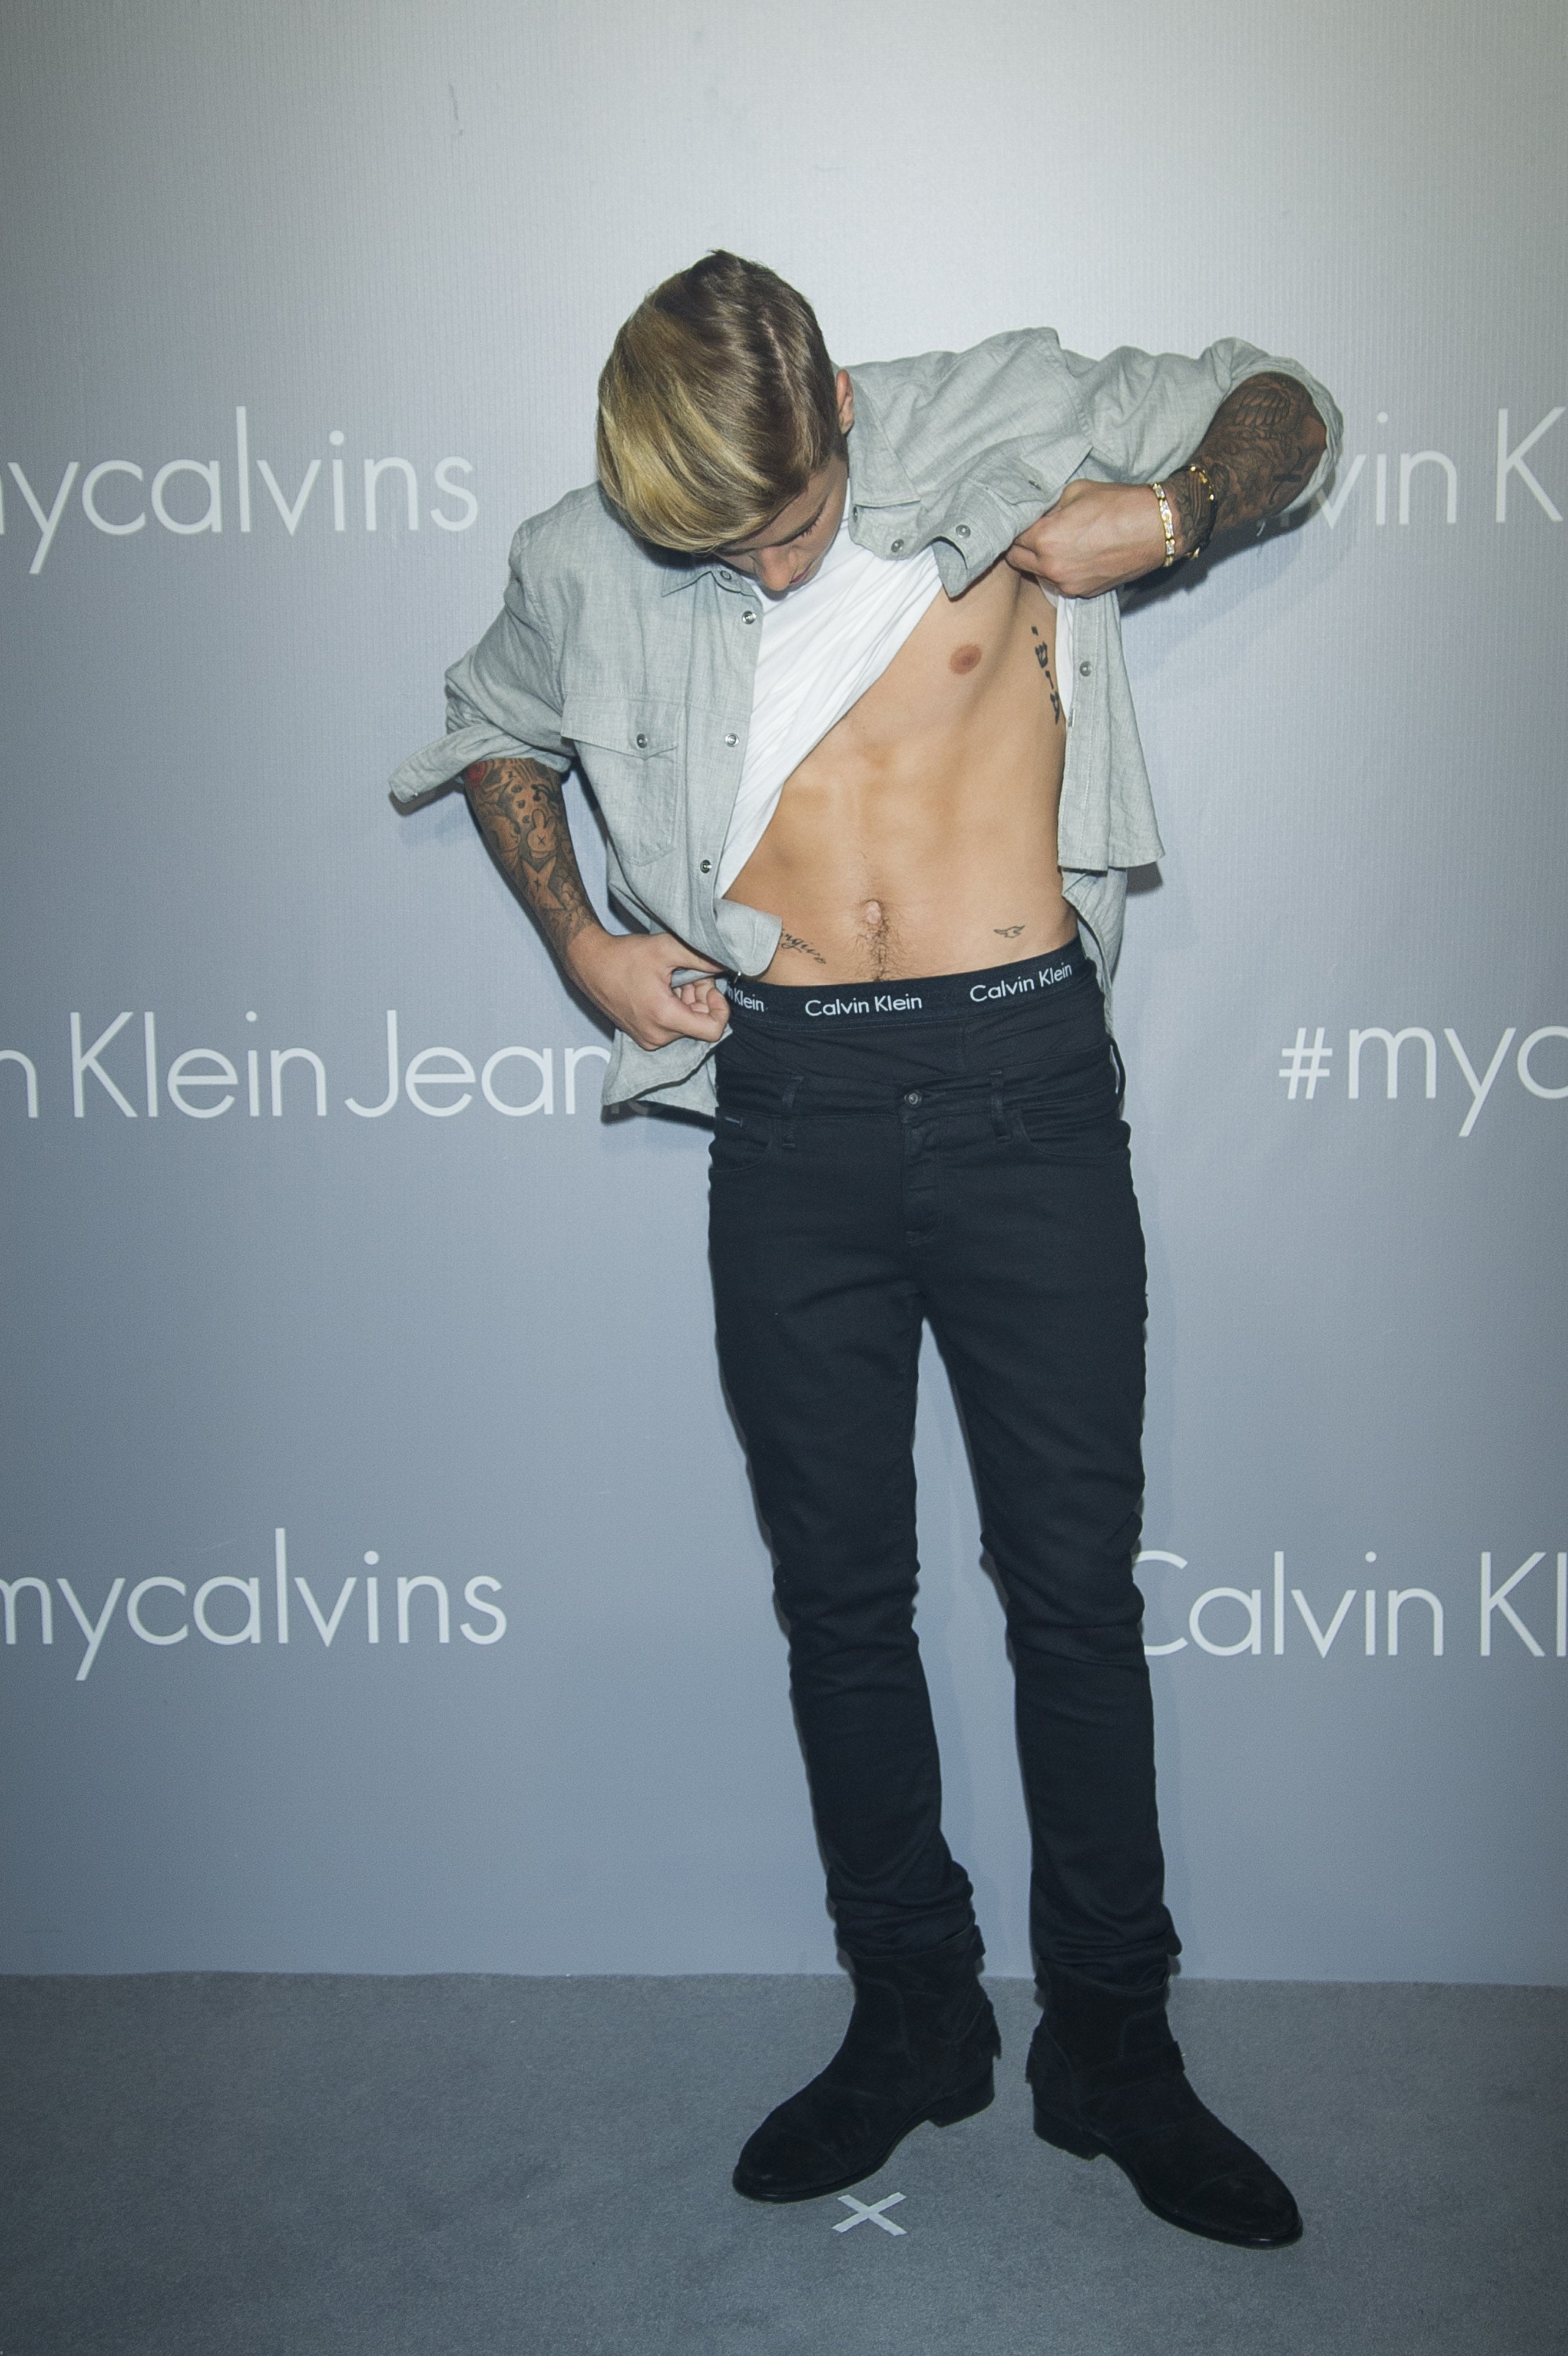 Justin Bieber and Kendall Jenner at Calvin Klein Event